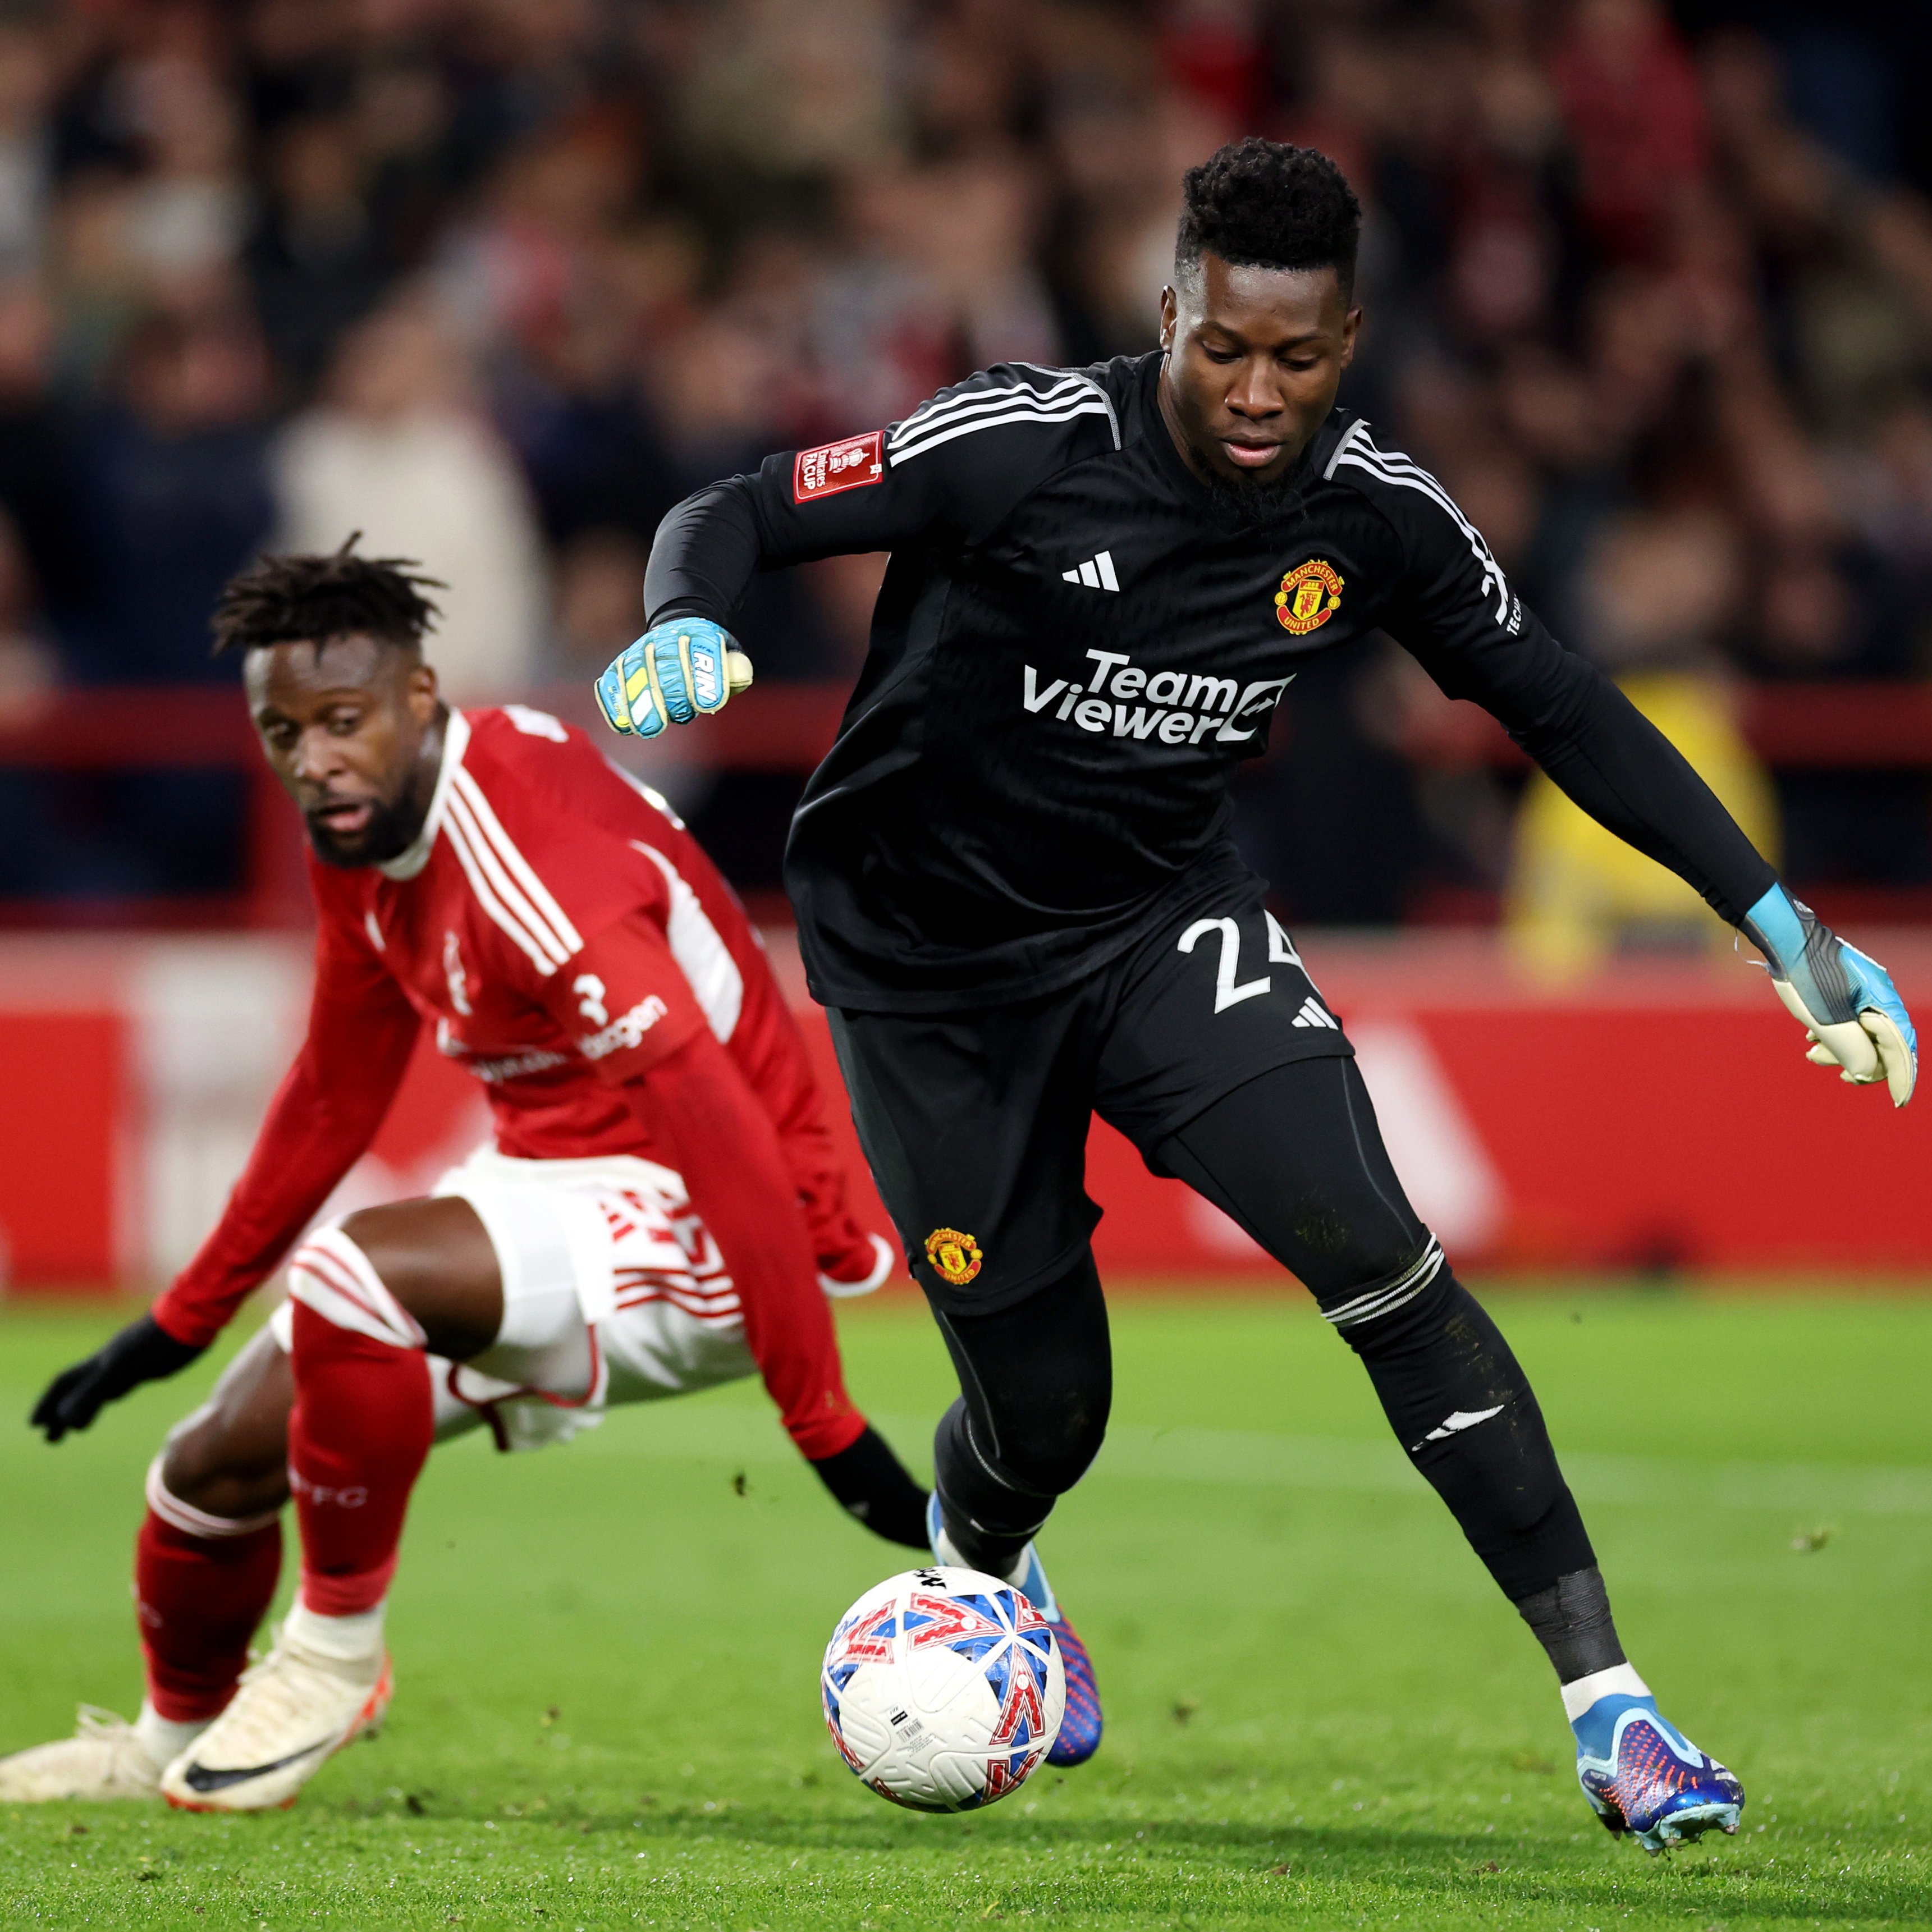 An image of André Onana dribbling with the ball for Manchester United